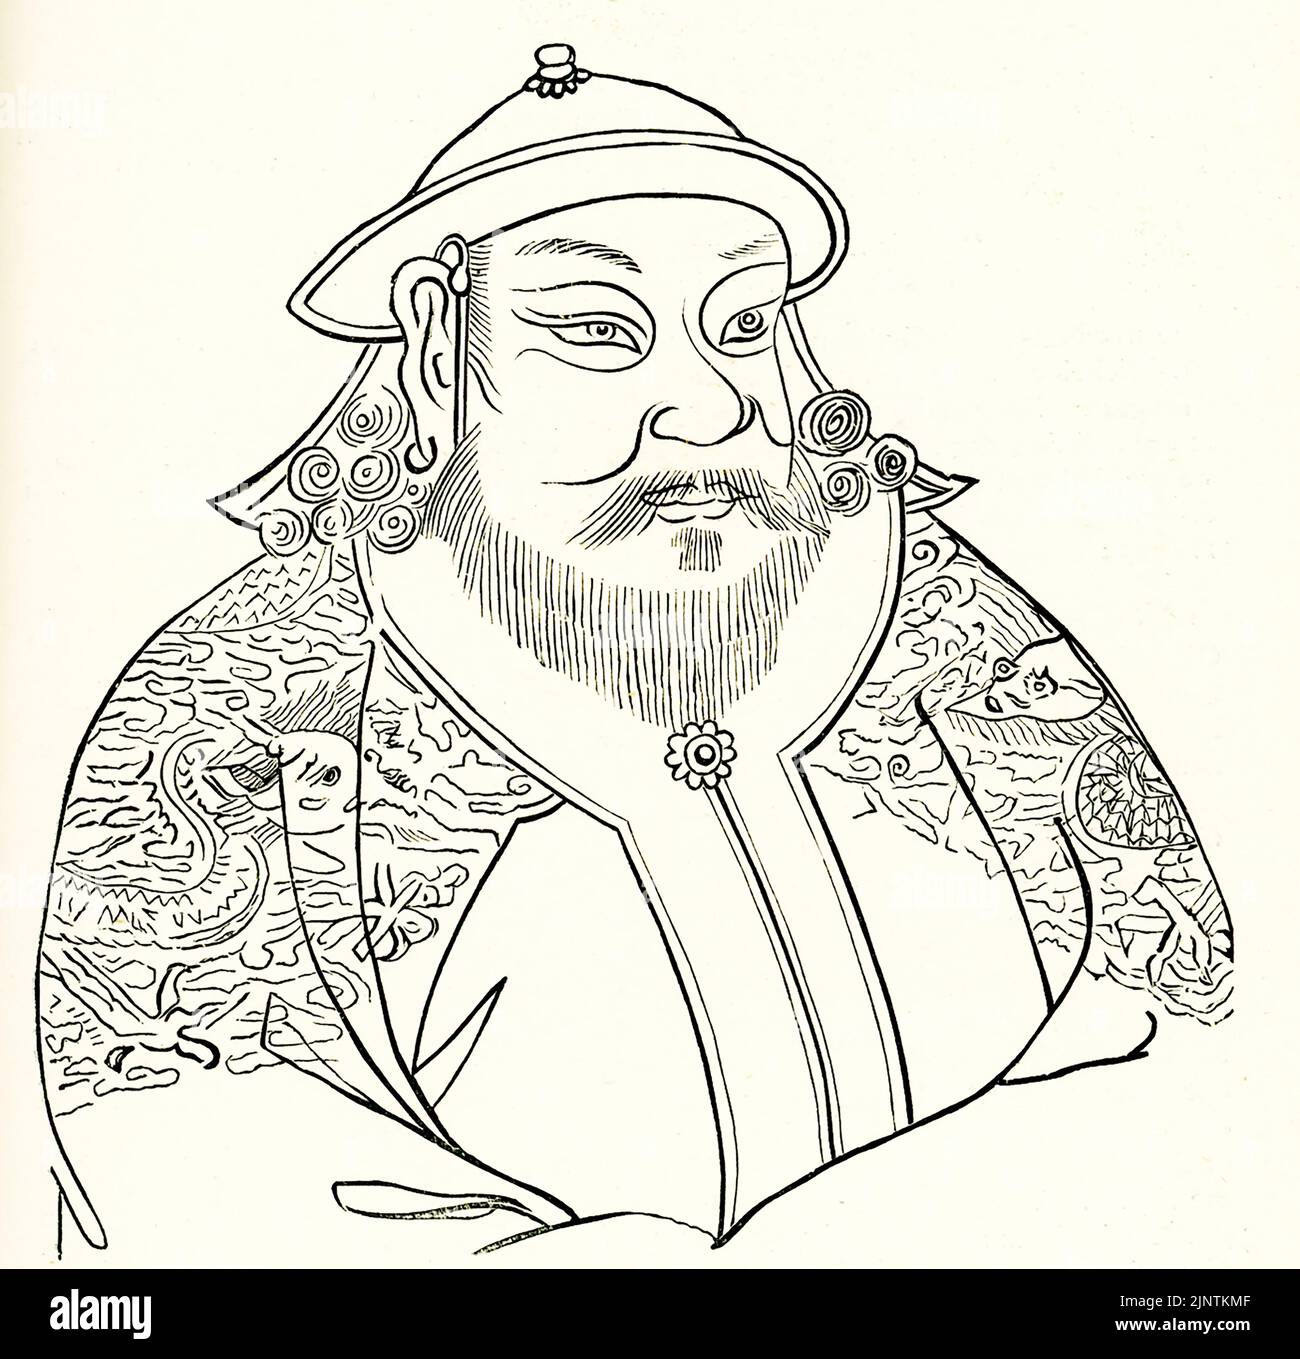 The caption for this map from The Travels of Marco Polo Vol I  as translated by Henry Yule reads: “Portrait pf Kublai Khan. From a Chinese engraving).” Kublai Khan, also known by his regnal name Setsen Khan, was the founder of the Yuan dynasty of China and the fifth khagan-emperor of the Mongol Empire from 1260 to 1294, although after the division of the empire this was a nominal position. Marco Polo was a Venetian traveler who left Venice, Italy, with his father Niccolo and uncle Maffeo in 1271. He arrived in China in 1275 where Kublai Khan had his court, and returned home in 1294.  Note that Stock Photo